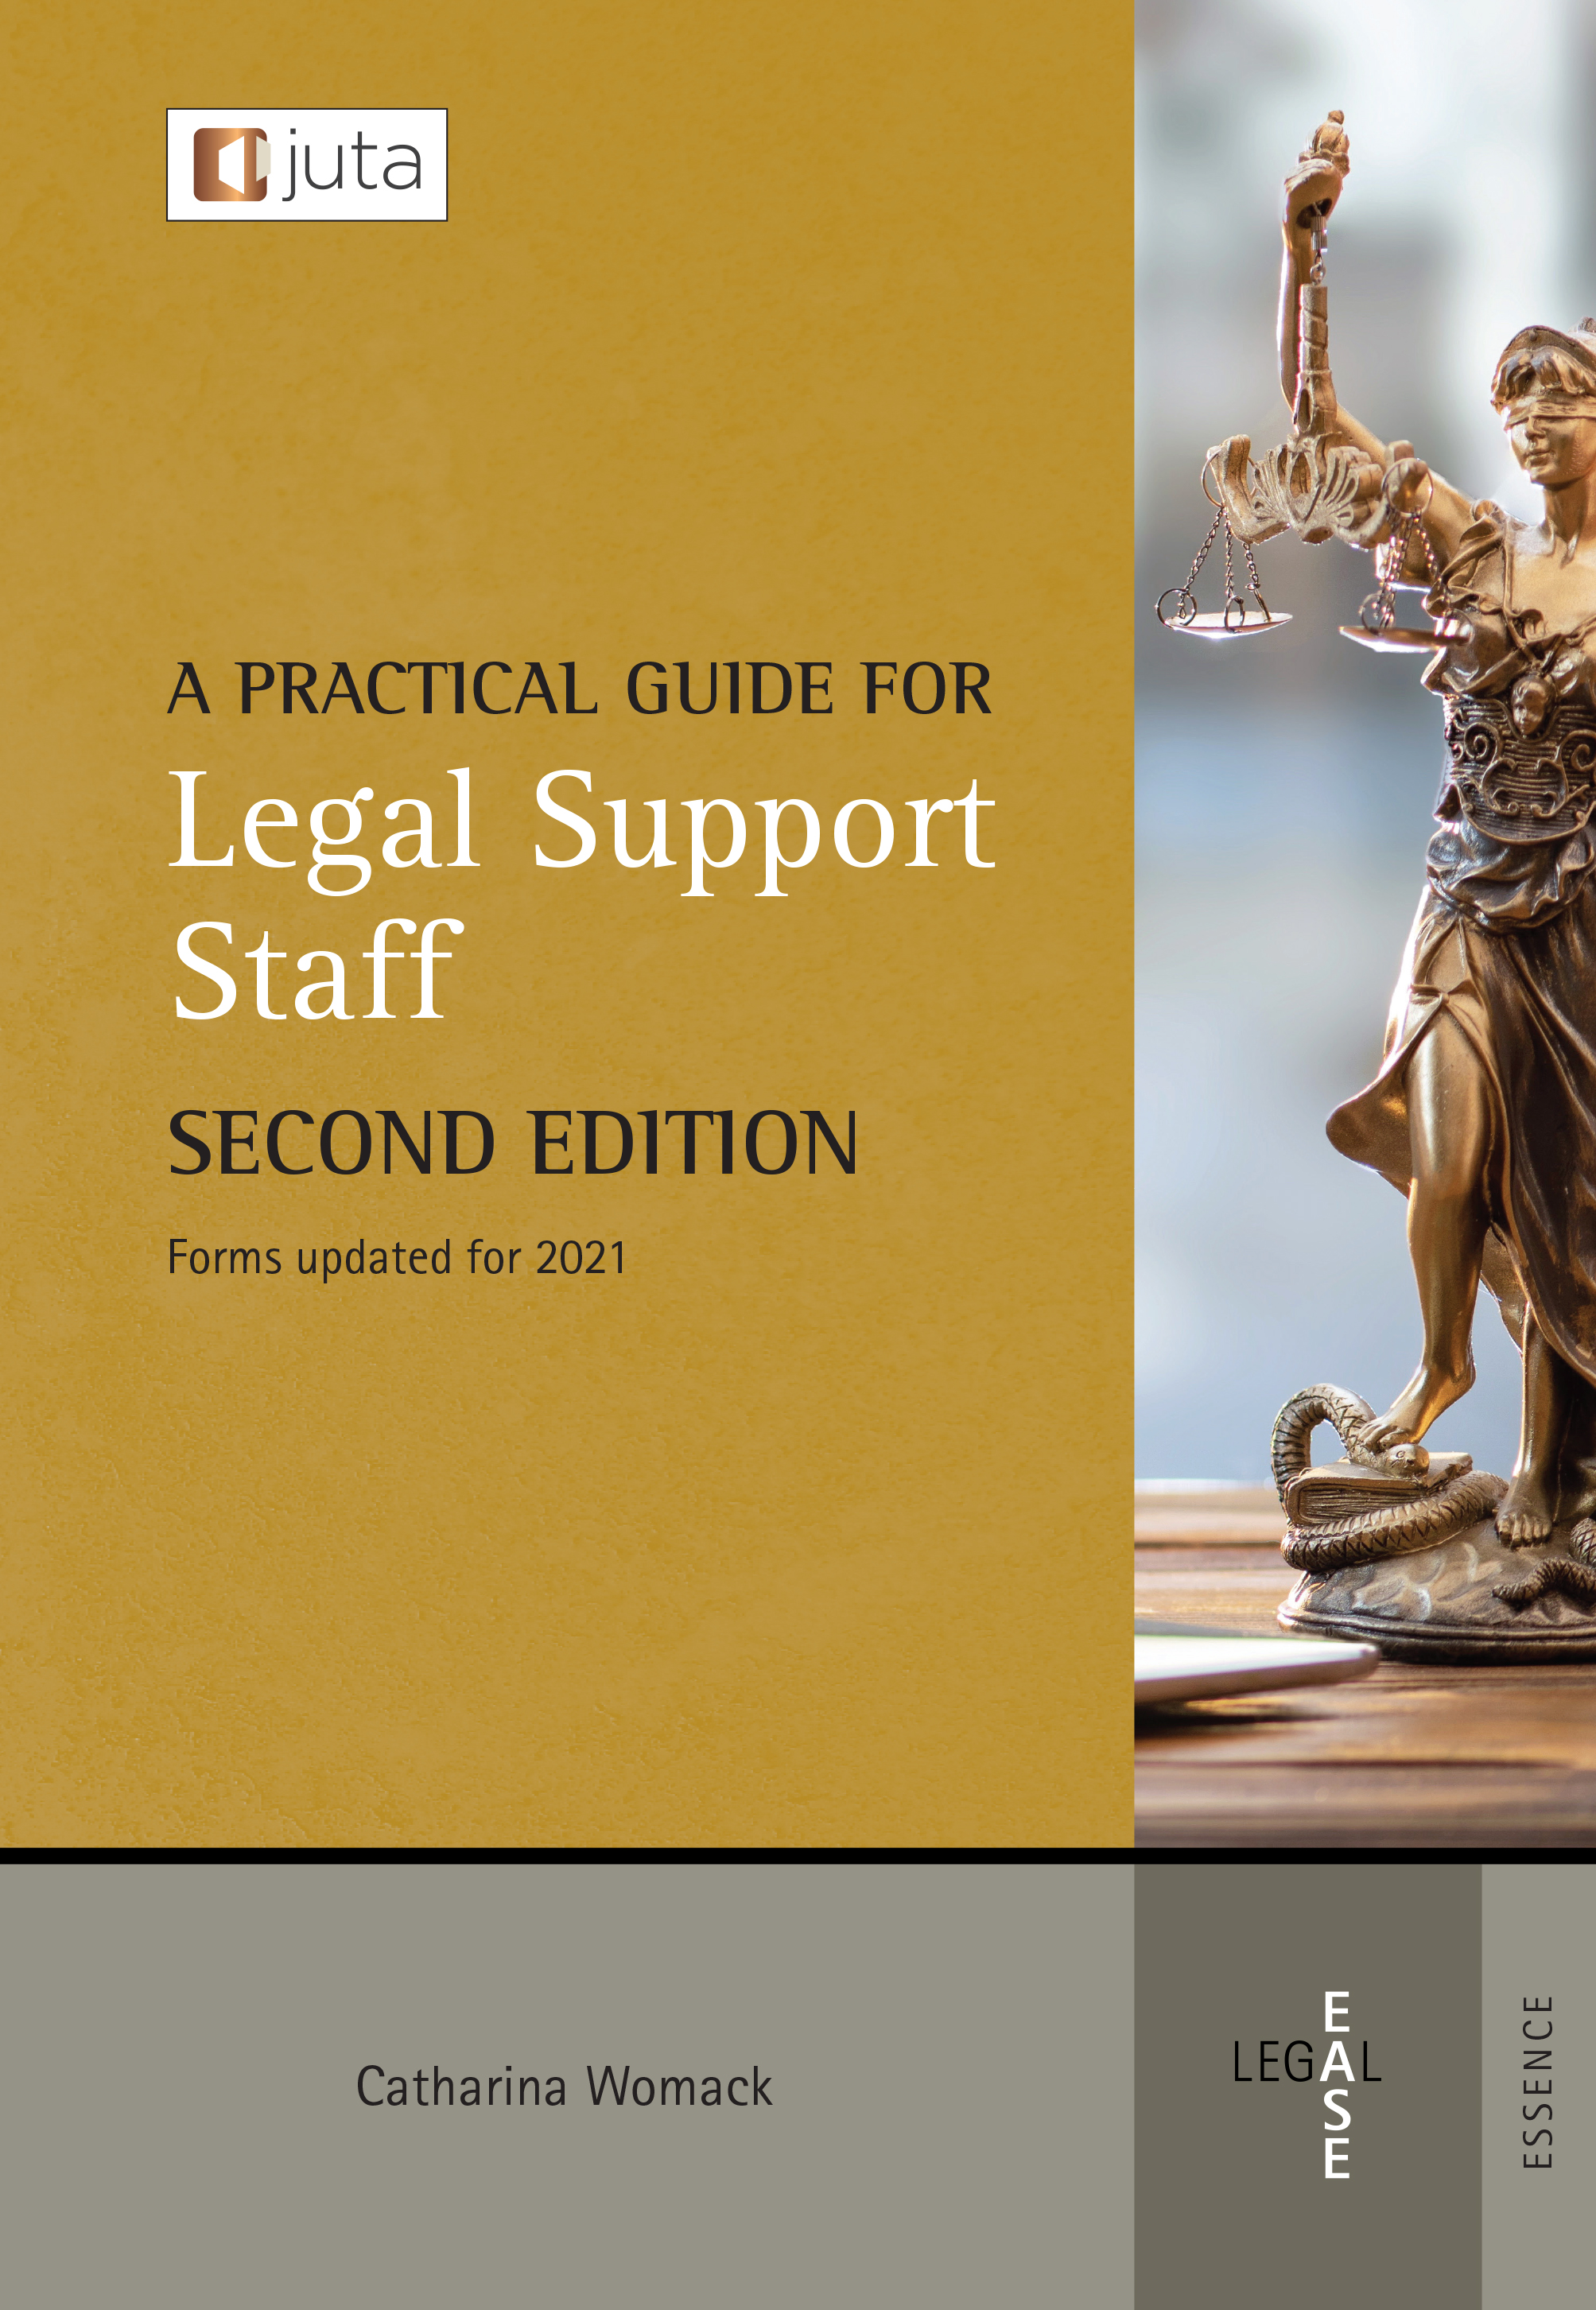 Practical Guide for Legal Support Staff